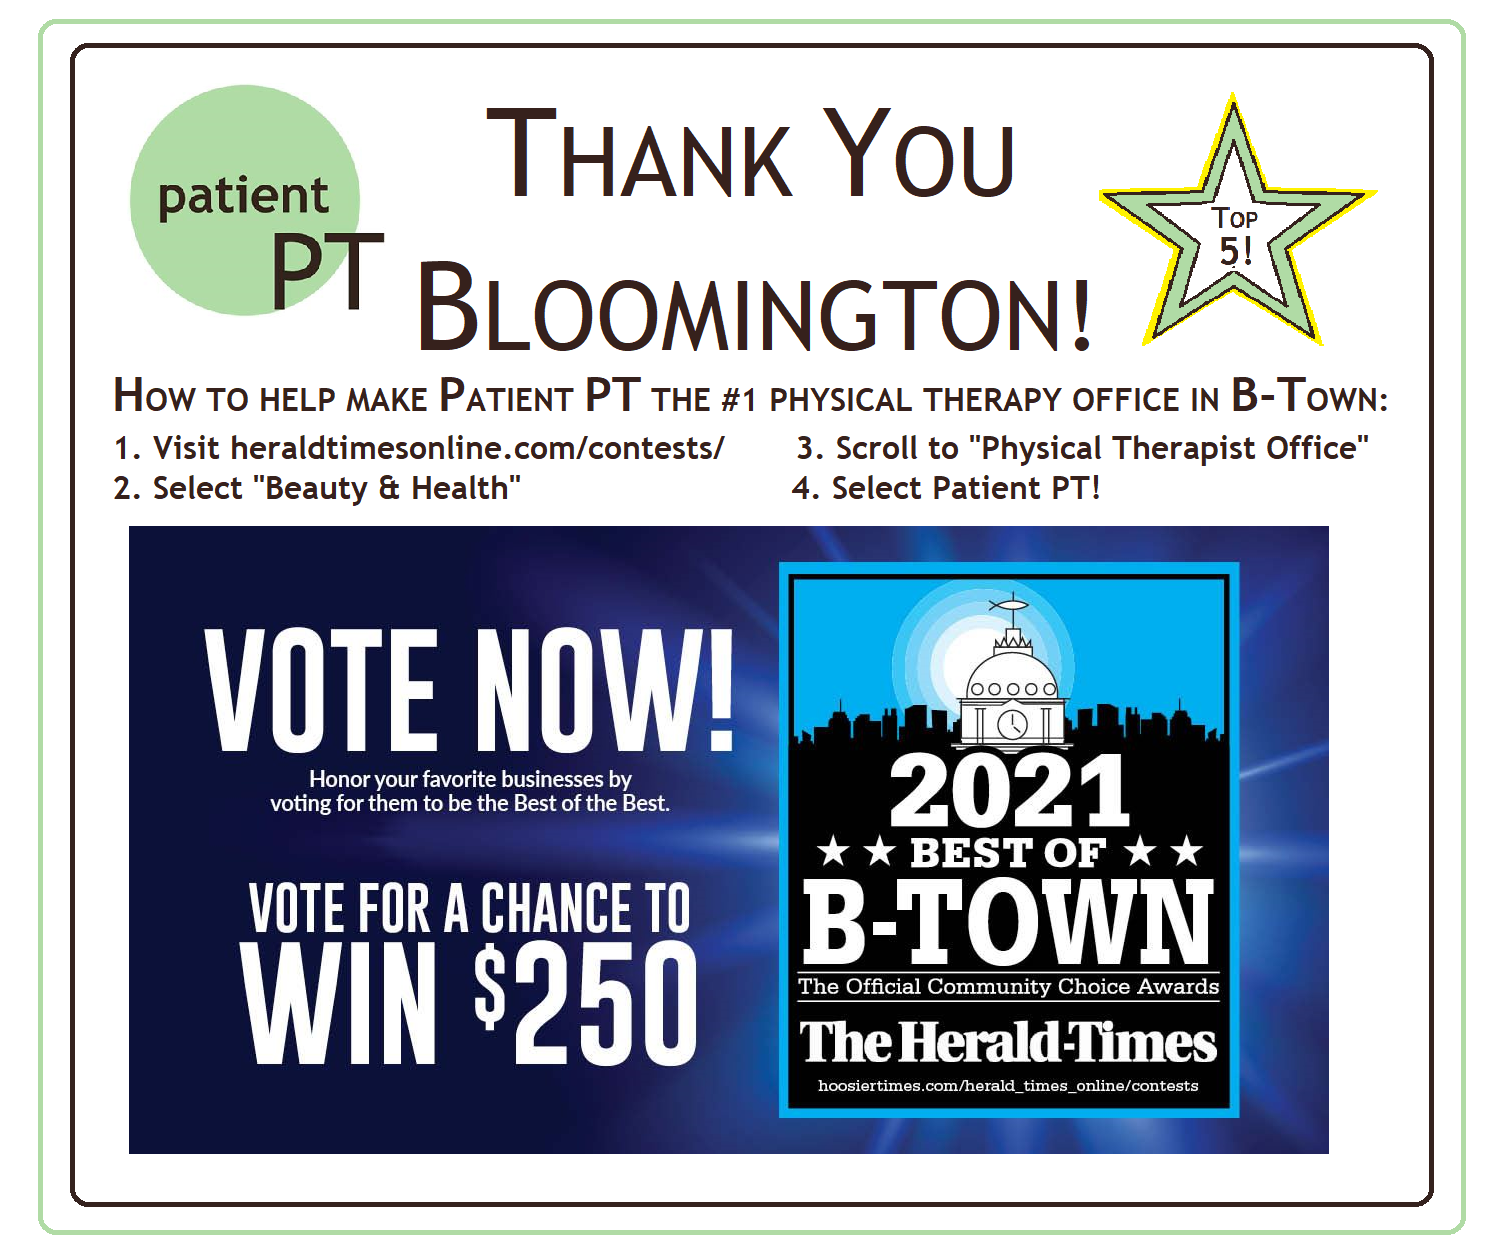 Graphic: Oh my gosh, thank you Bloomington for making my little clinic one of the Top 5 Physical Therapy Offices in Bloomington! To vote us up to number one, click here: https://embed-813989.secondstreetapp.com/.../295719305/